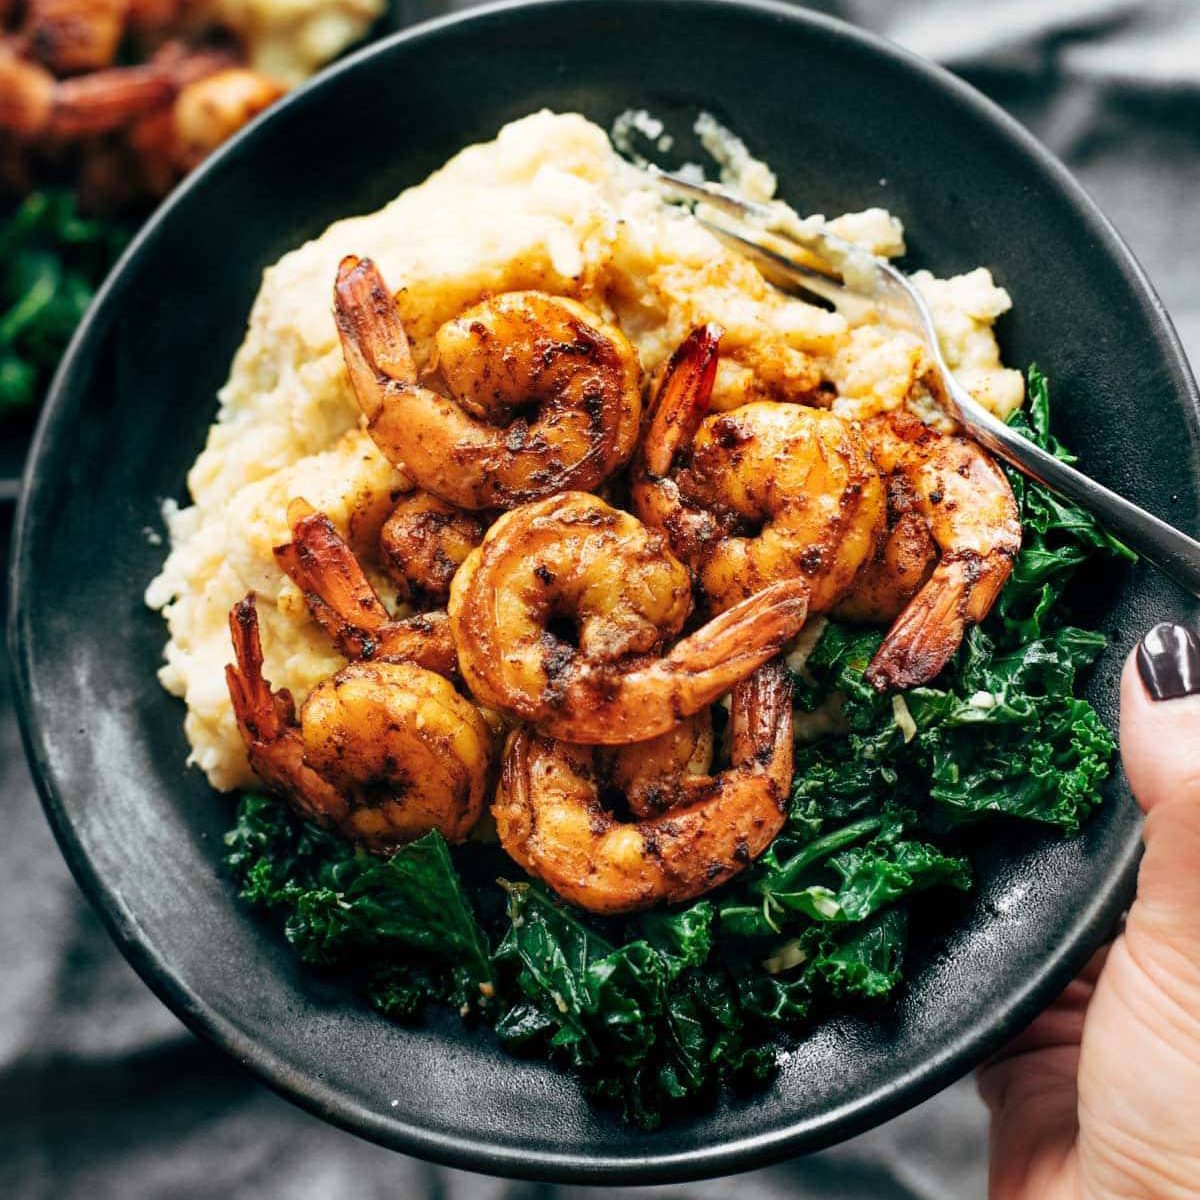 Shrimp and kale in a bowl with cauliflower mash.